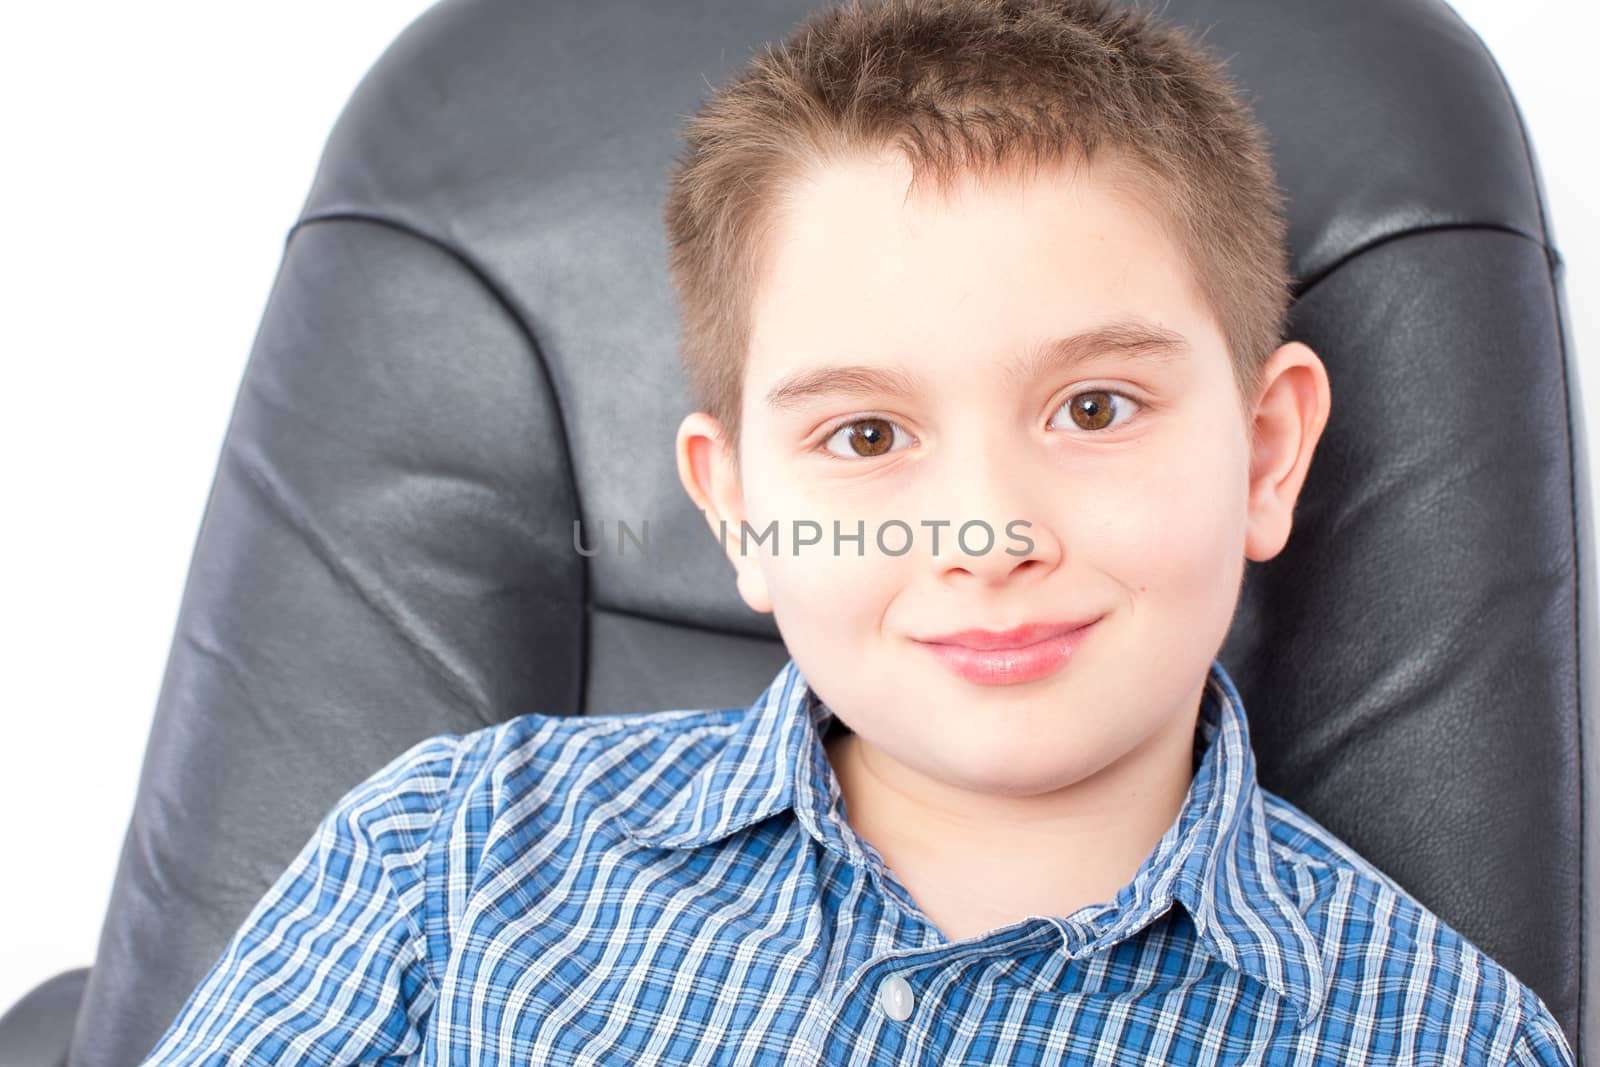 Close up Smiling Cute American Boy Sitting on a Black Office Chair, Looking at the Camera, on a White Background.